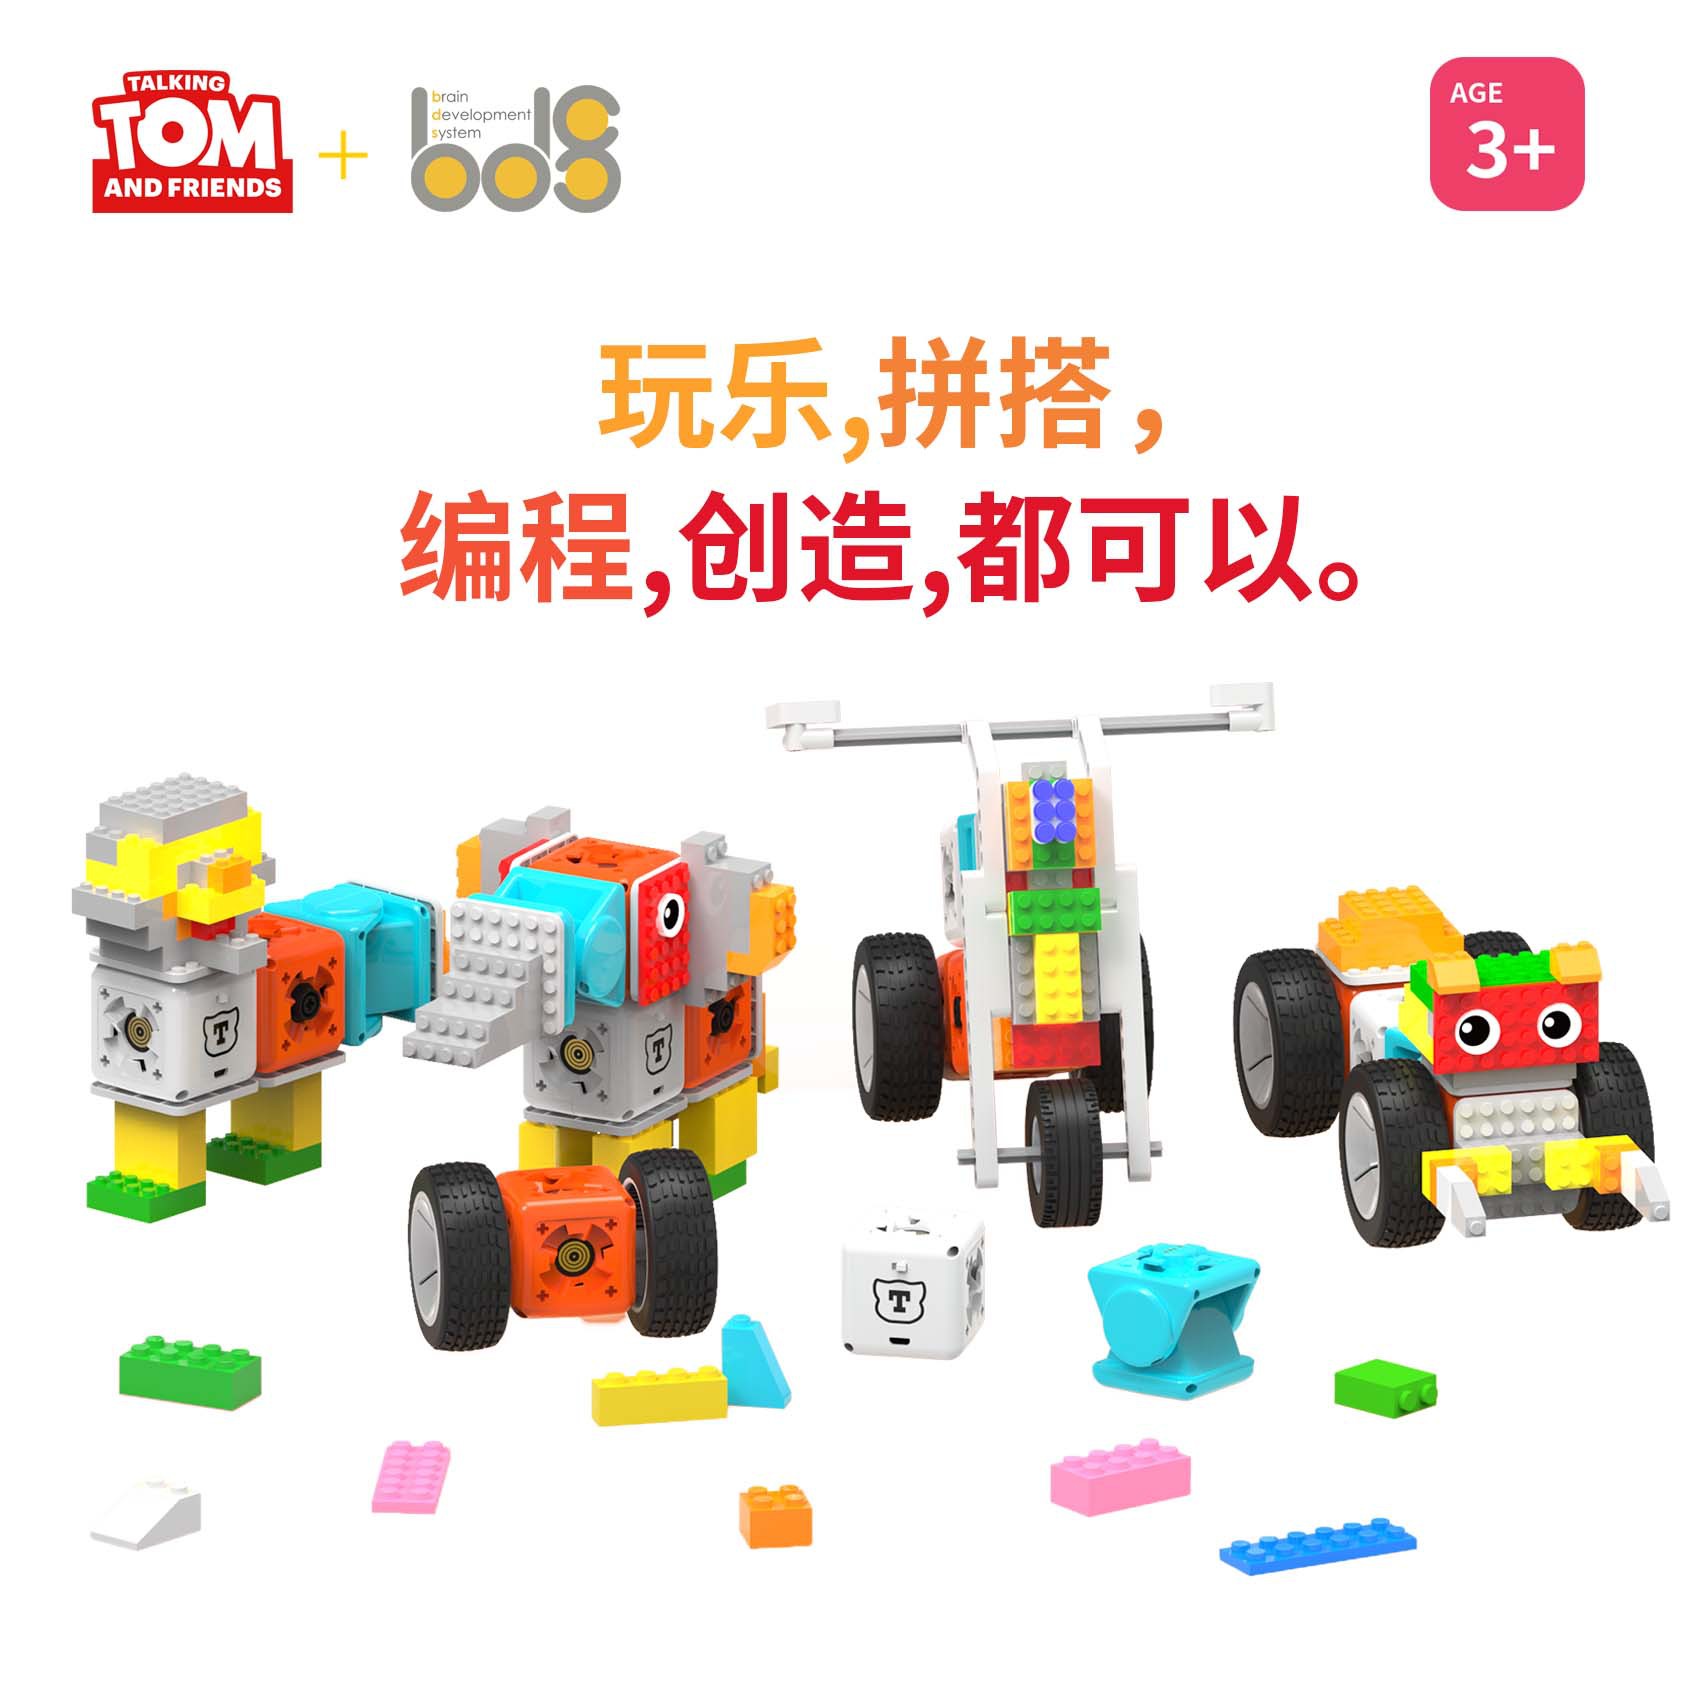 speak Tom Cat Sugar intelligence Cell robot New products Electric Building blocks Lego compatible Toys